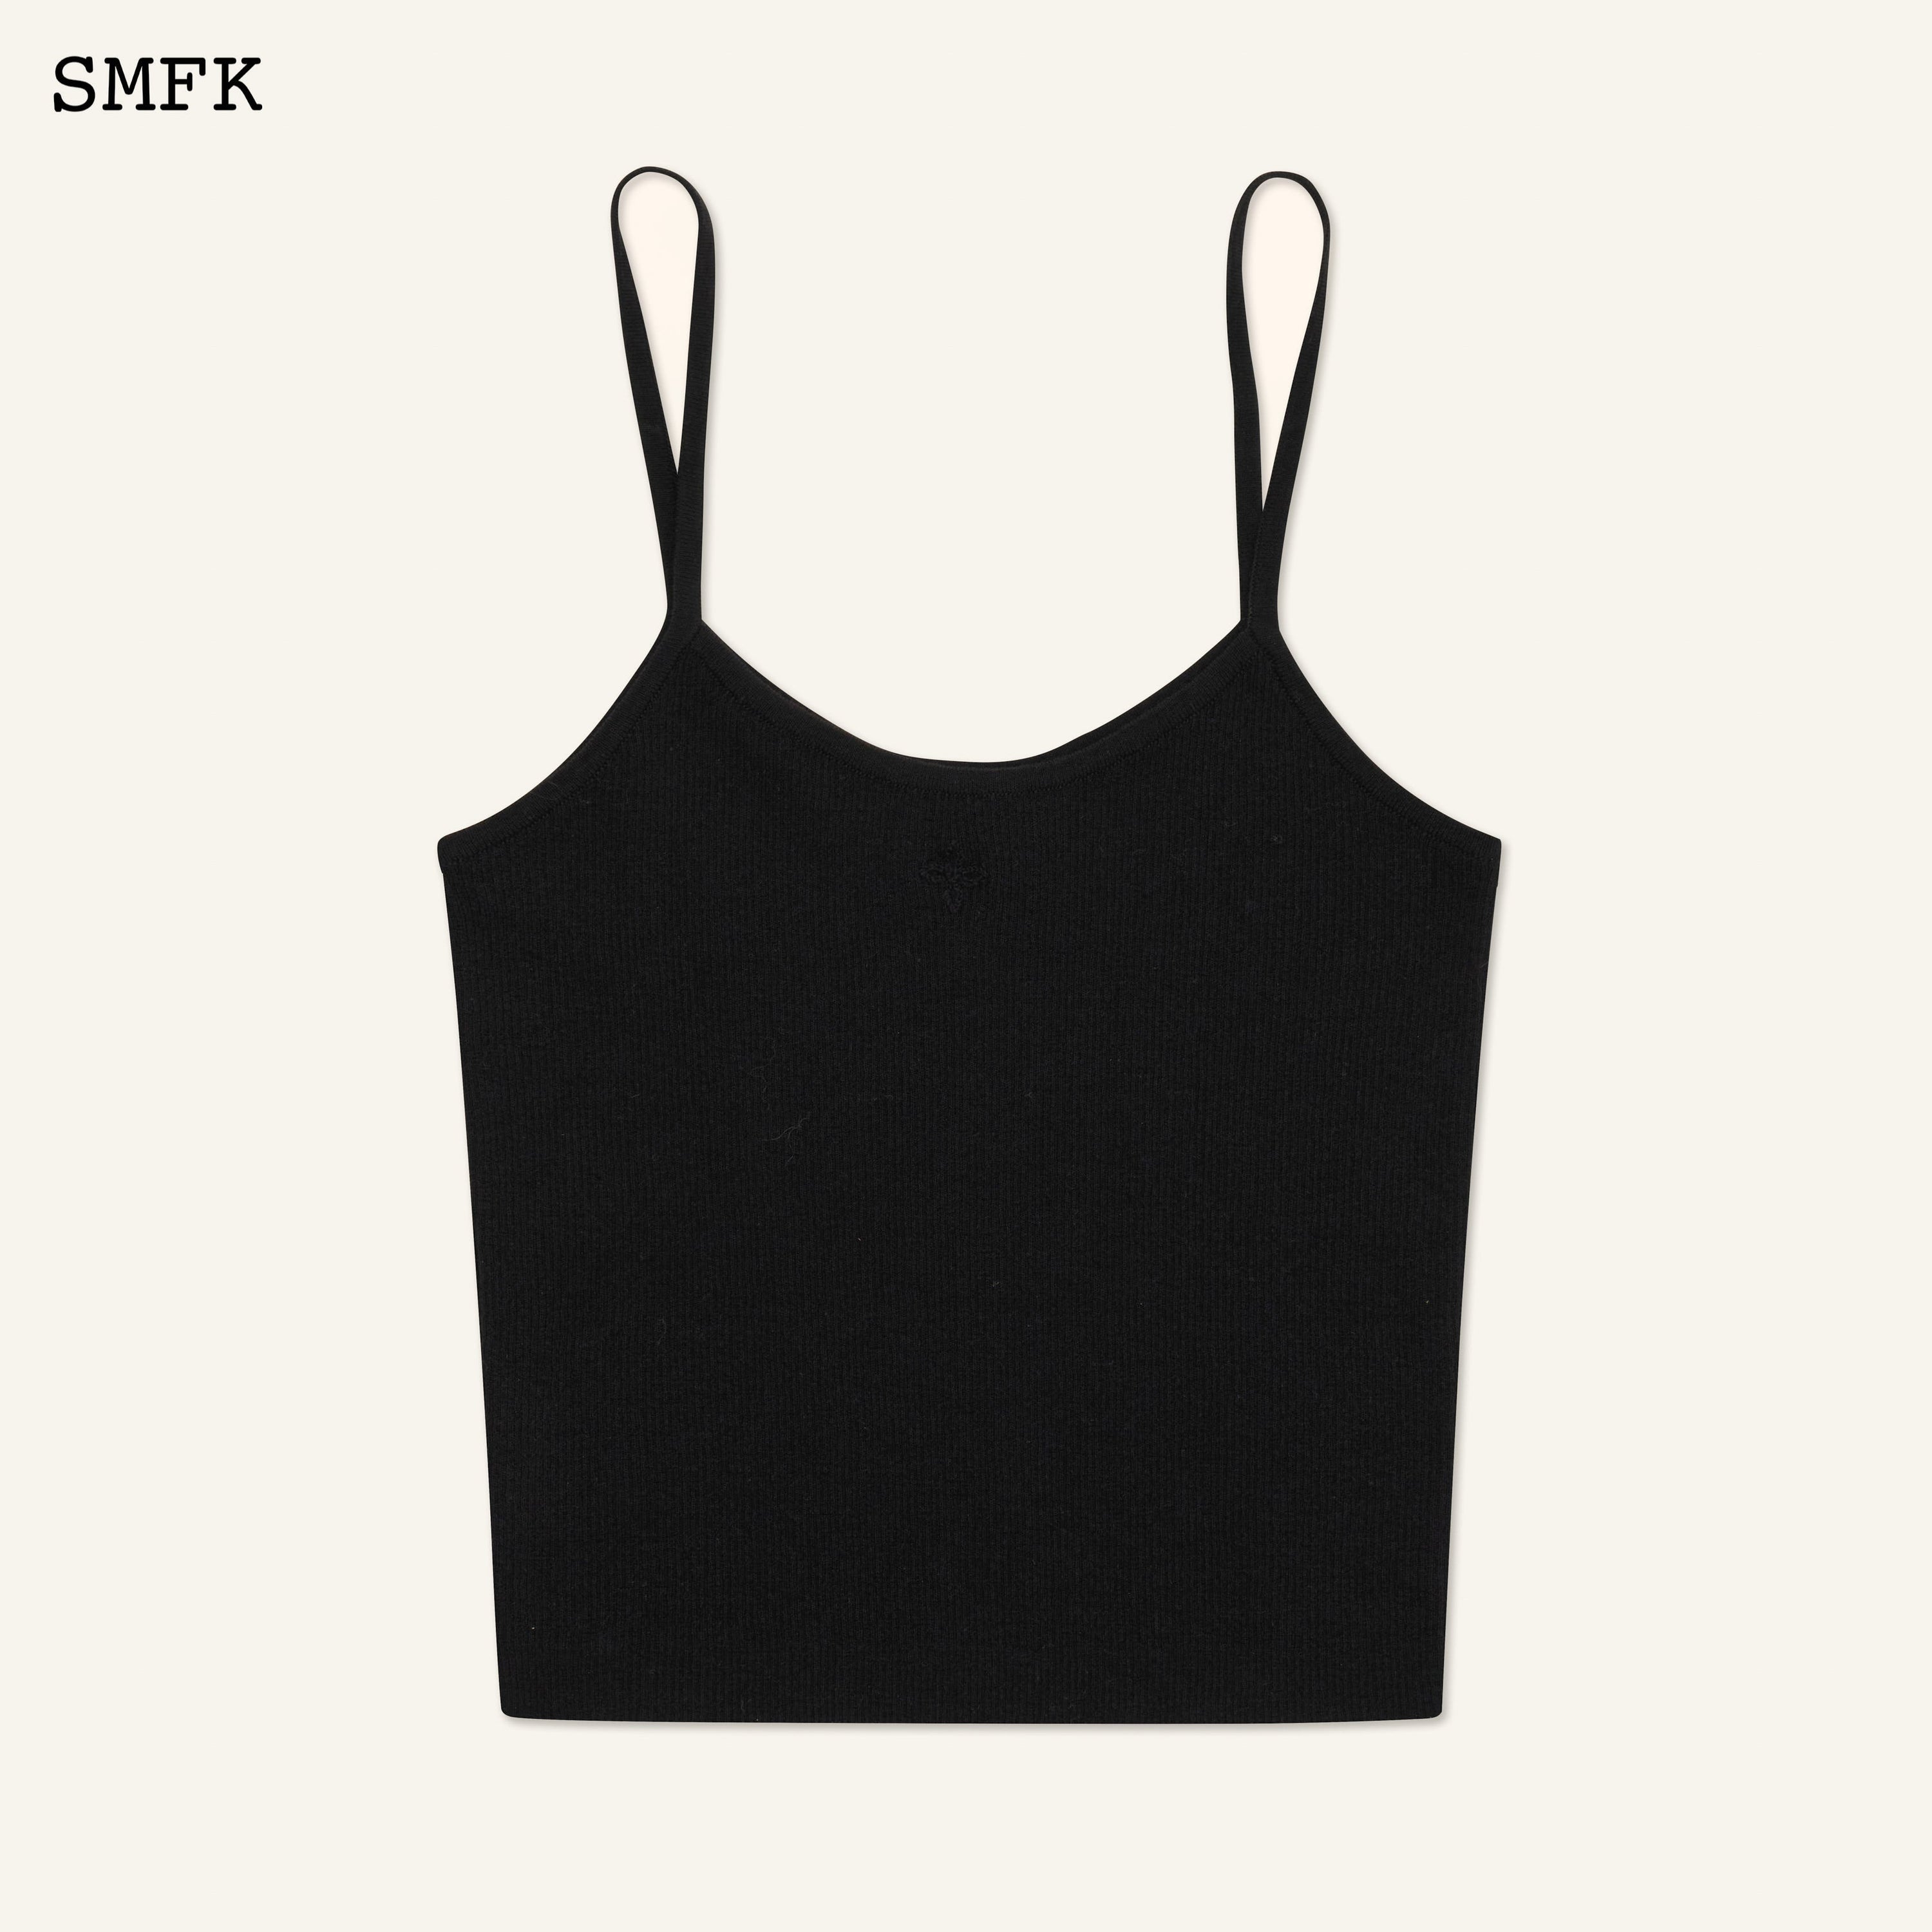 Compass Cross Classic Knitted Vest Top Black - SMFK Official